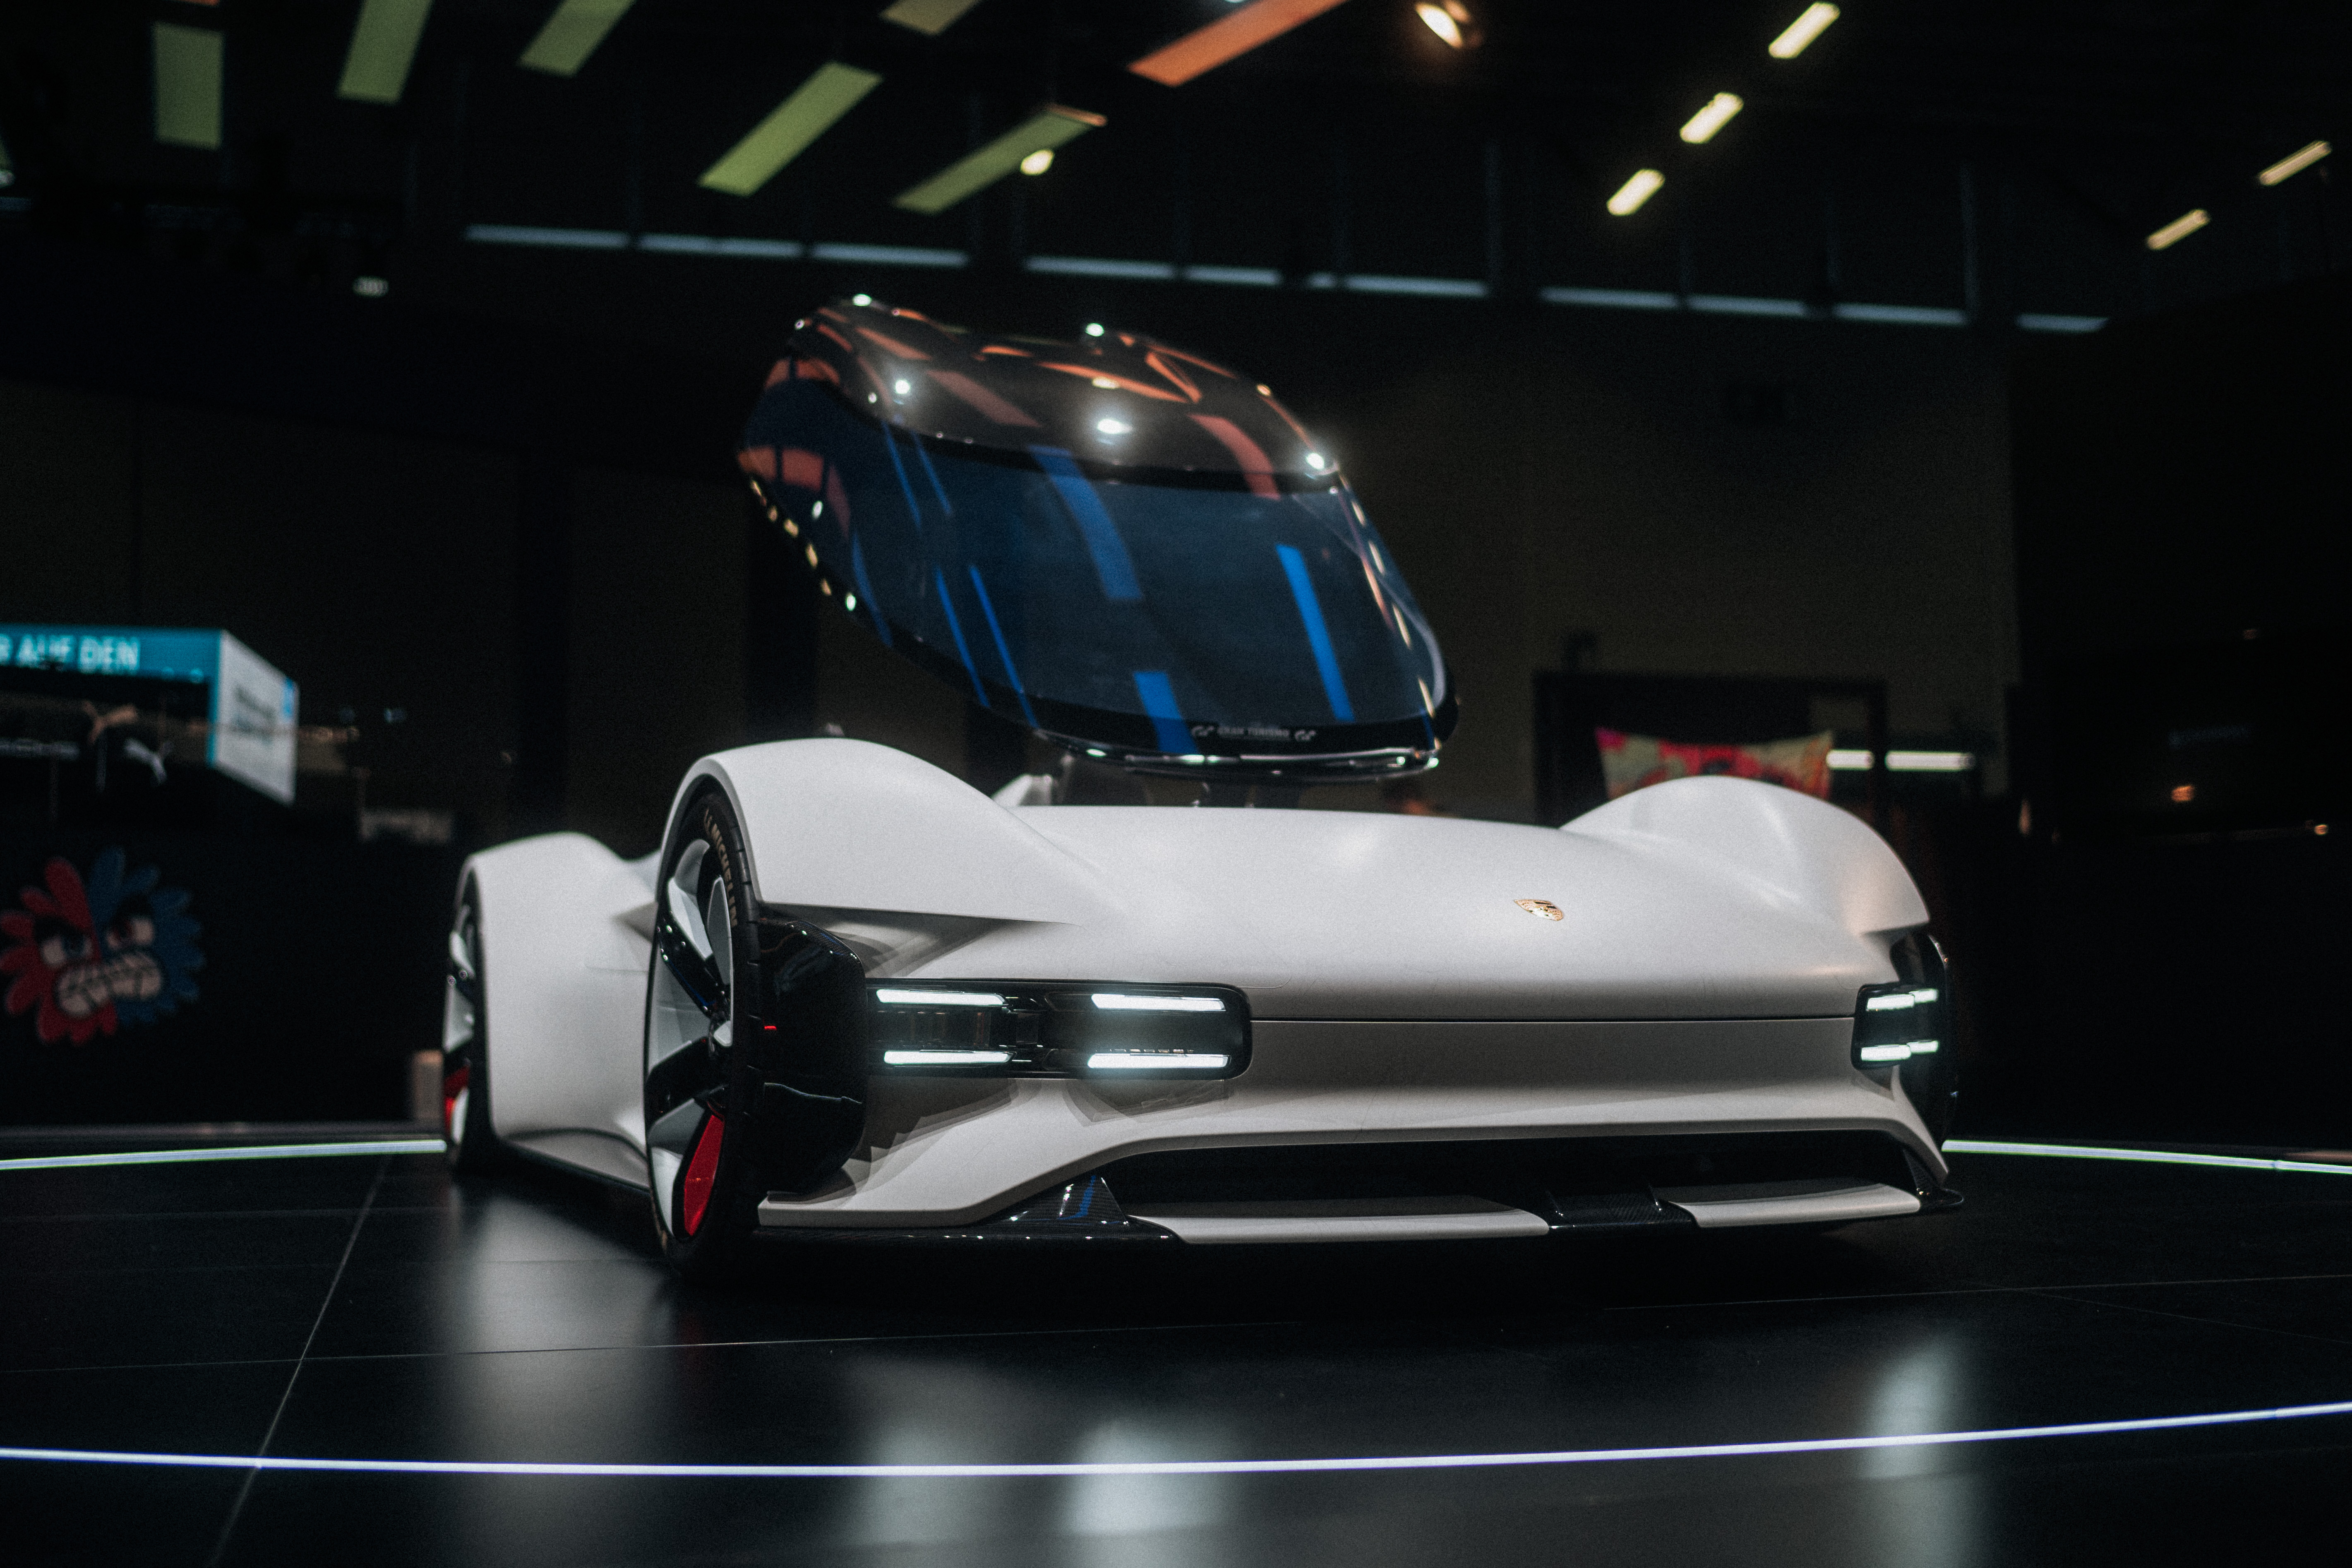 Front view of white Porsche Vision GT, transparent roof raised